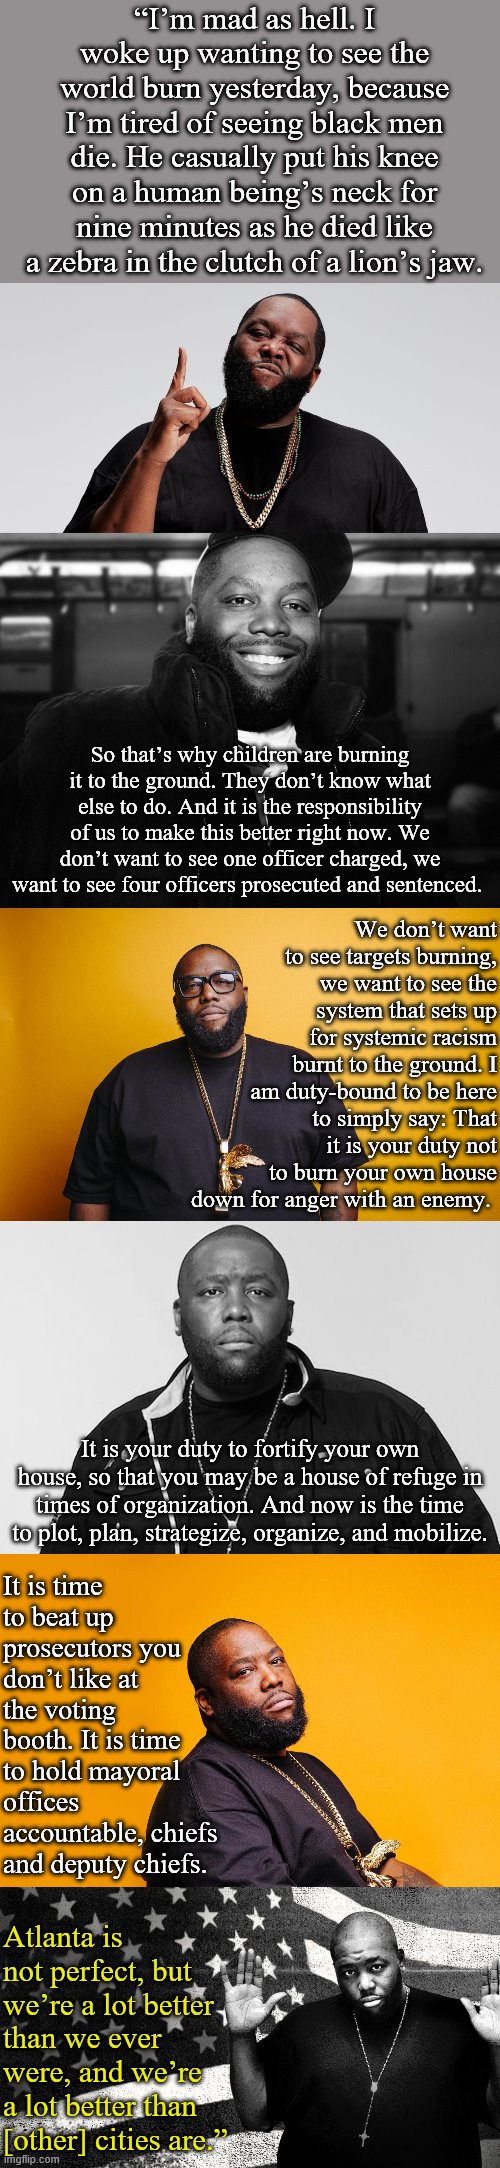 Killer Mike's eloquent statement on the George Floyd protests. Run the Jewels 2020? | “I’m mad as hell. I woke up wanting to see the world burn yesterday, because I’m tired of seeing black men die. He casually put his knee on a human being’s neck for nine minutes as he died like a zebra in the clutch of a lion’s jaw. So that’s why children are burning it to the ground. They don’t know what else to do. And it is the responsibility of us to make this better right now. We don’t want to see one officer charged, we want to see four officers prosecuted and sentenced. We don’t want to see targets burning, we want to see the system that sets up for systemic racism burnt to the ground. I am duty-bound to be here to simply say: That it is your duty not to burn your own house down for anger with an enemy. It is your duty to fortify your own house, so that you may be a house of refuge in times of organization. And now is the time to plot, plan, strategize, organize, and mobilize. It is time to beat up prosecutors you don’t like at the voting booth. It is time to hold mayoral offices accountable, chiefs and deputy chiefs. Atlanta is not perfect, but we’re a lot better than we ever were, and we’re a lot better than [other] cities are.” | image tagged in killer mike,black lives matter,quotes,police brutality,racism,change | made w/ Imgflip meme maker